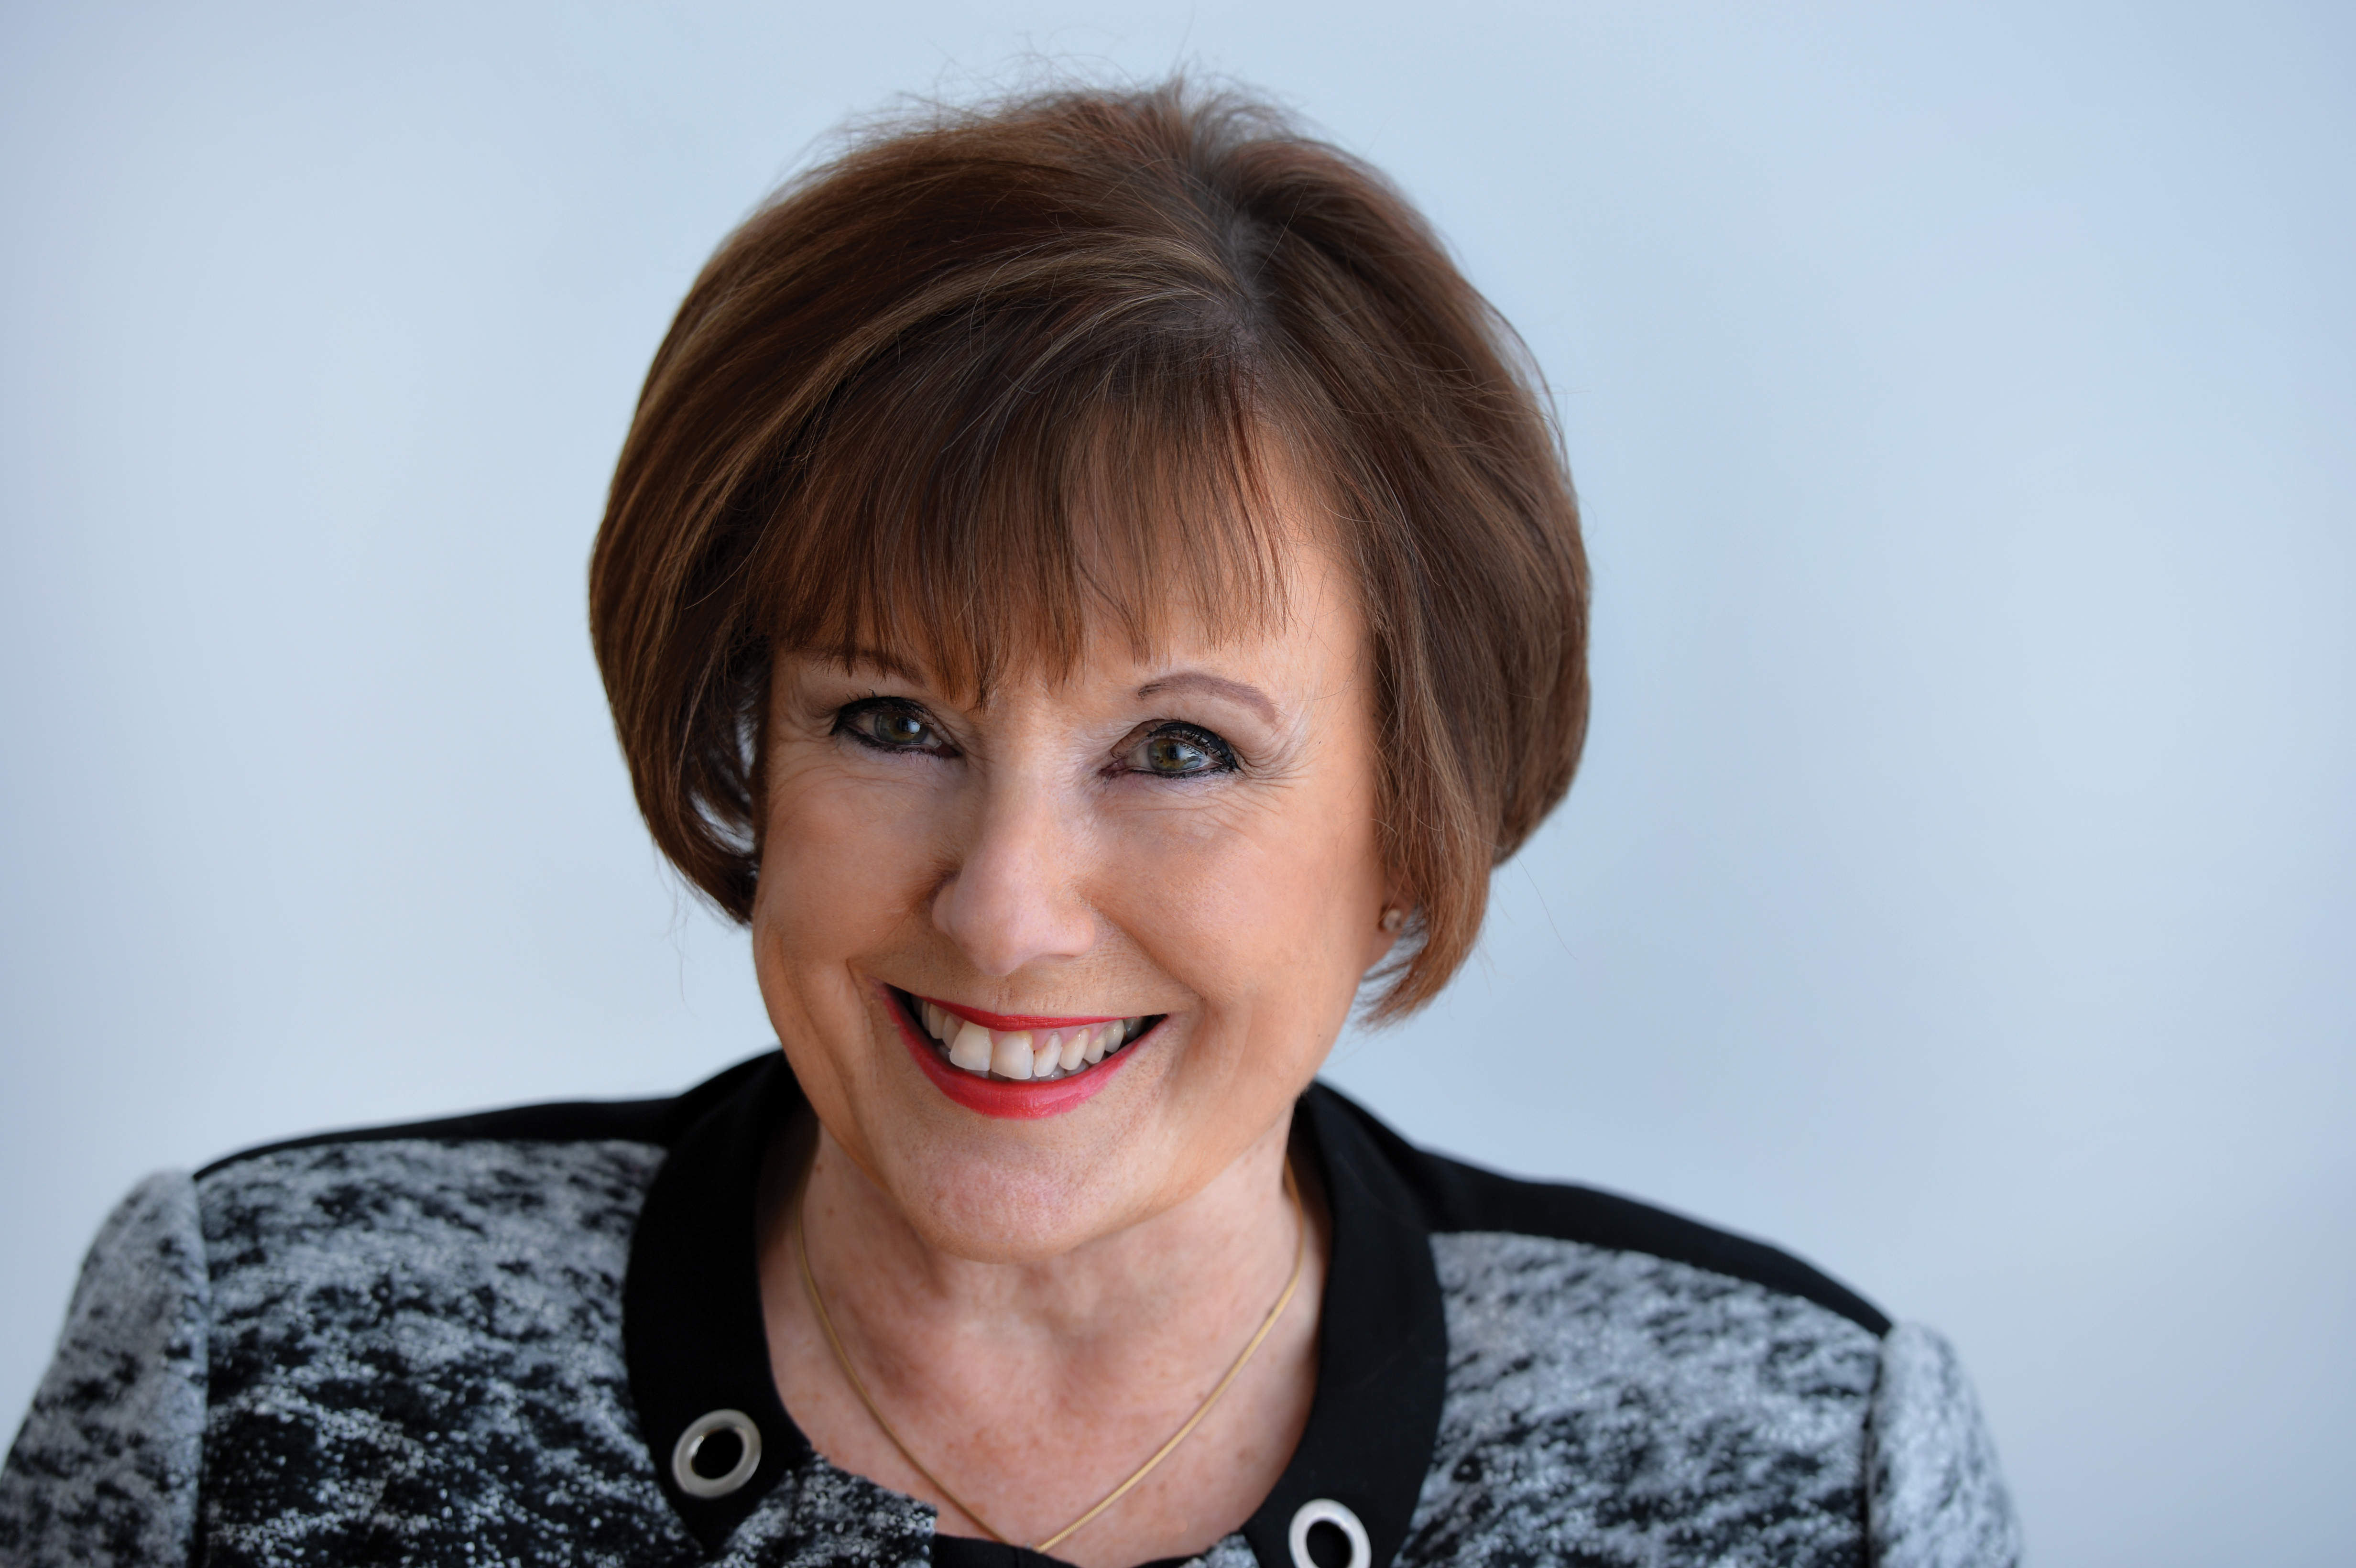 Bibby Leasing: Going direct for growth with Carol Roberts